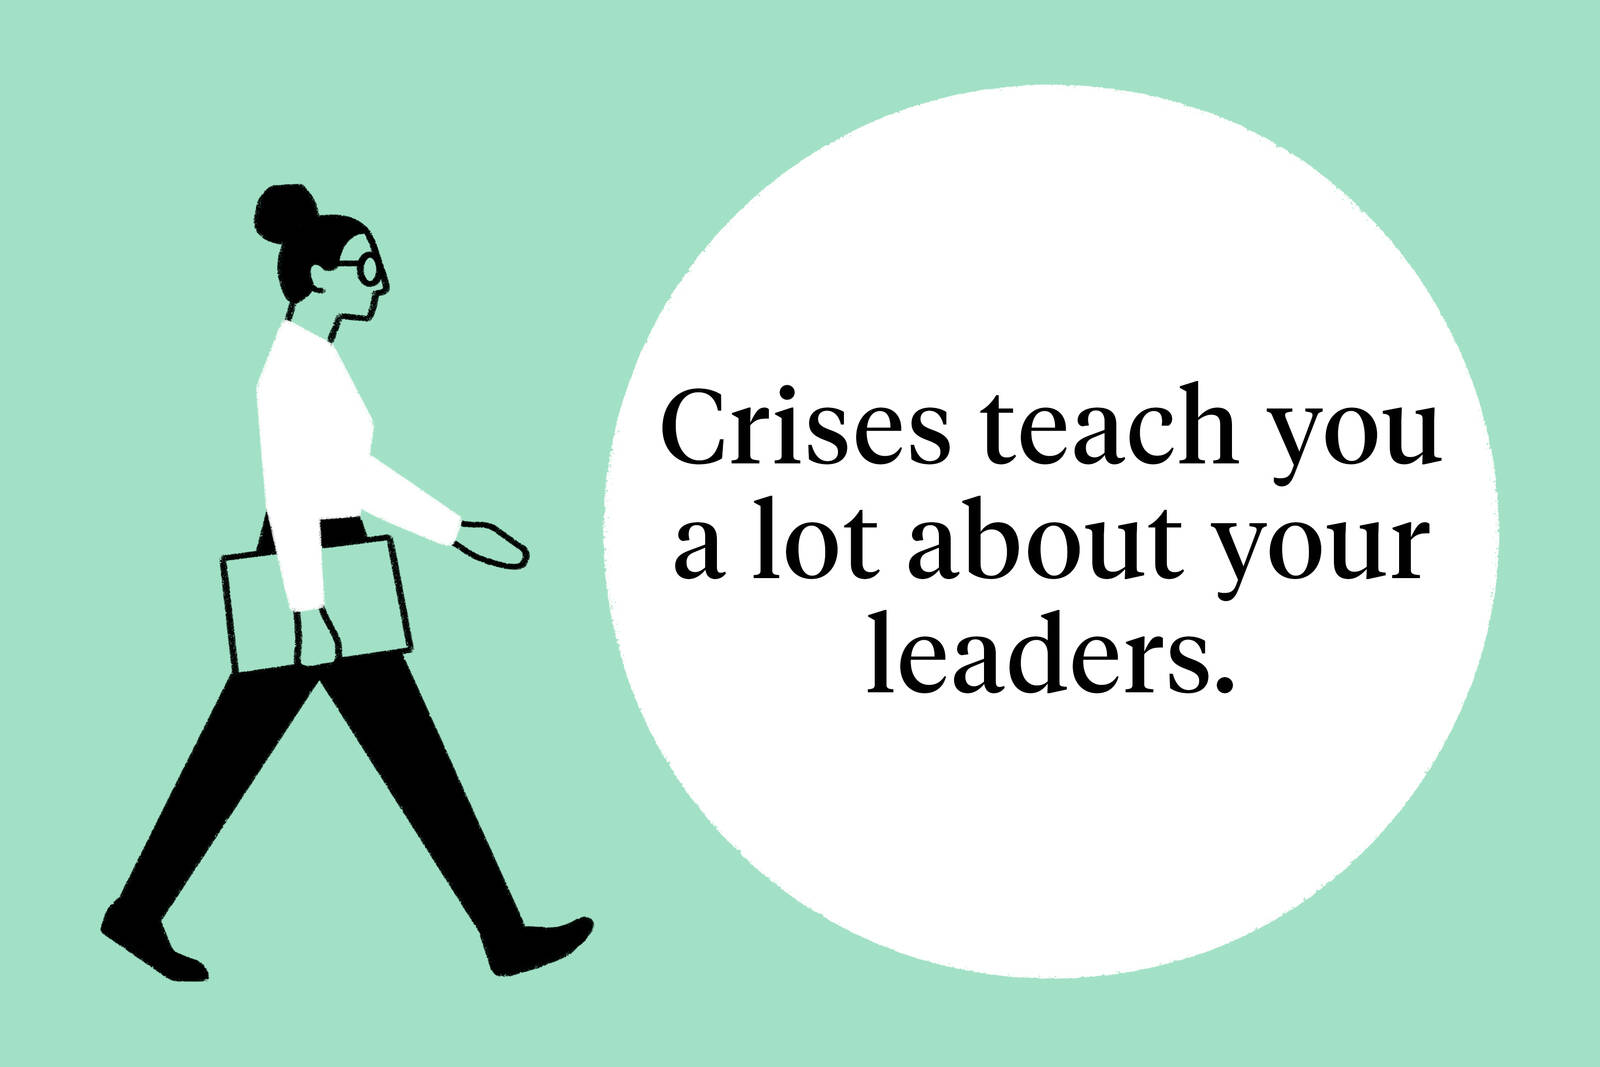 Crises teach you a lot about your leaders.